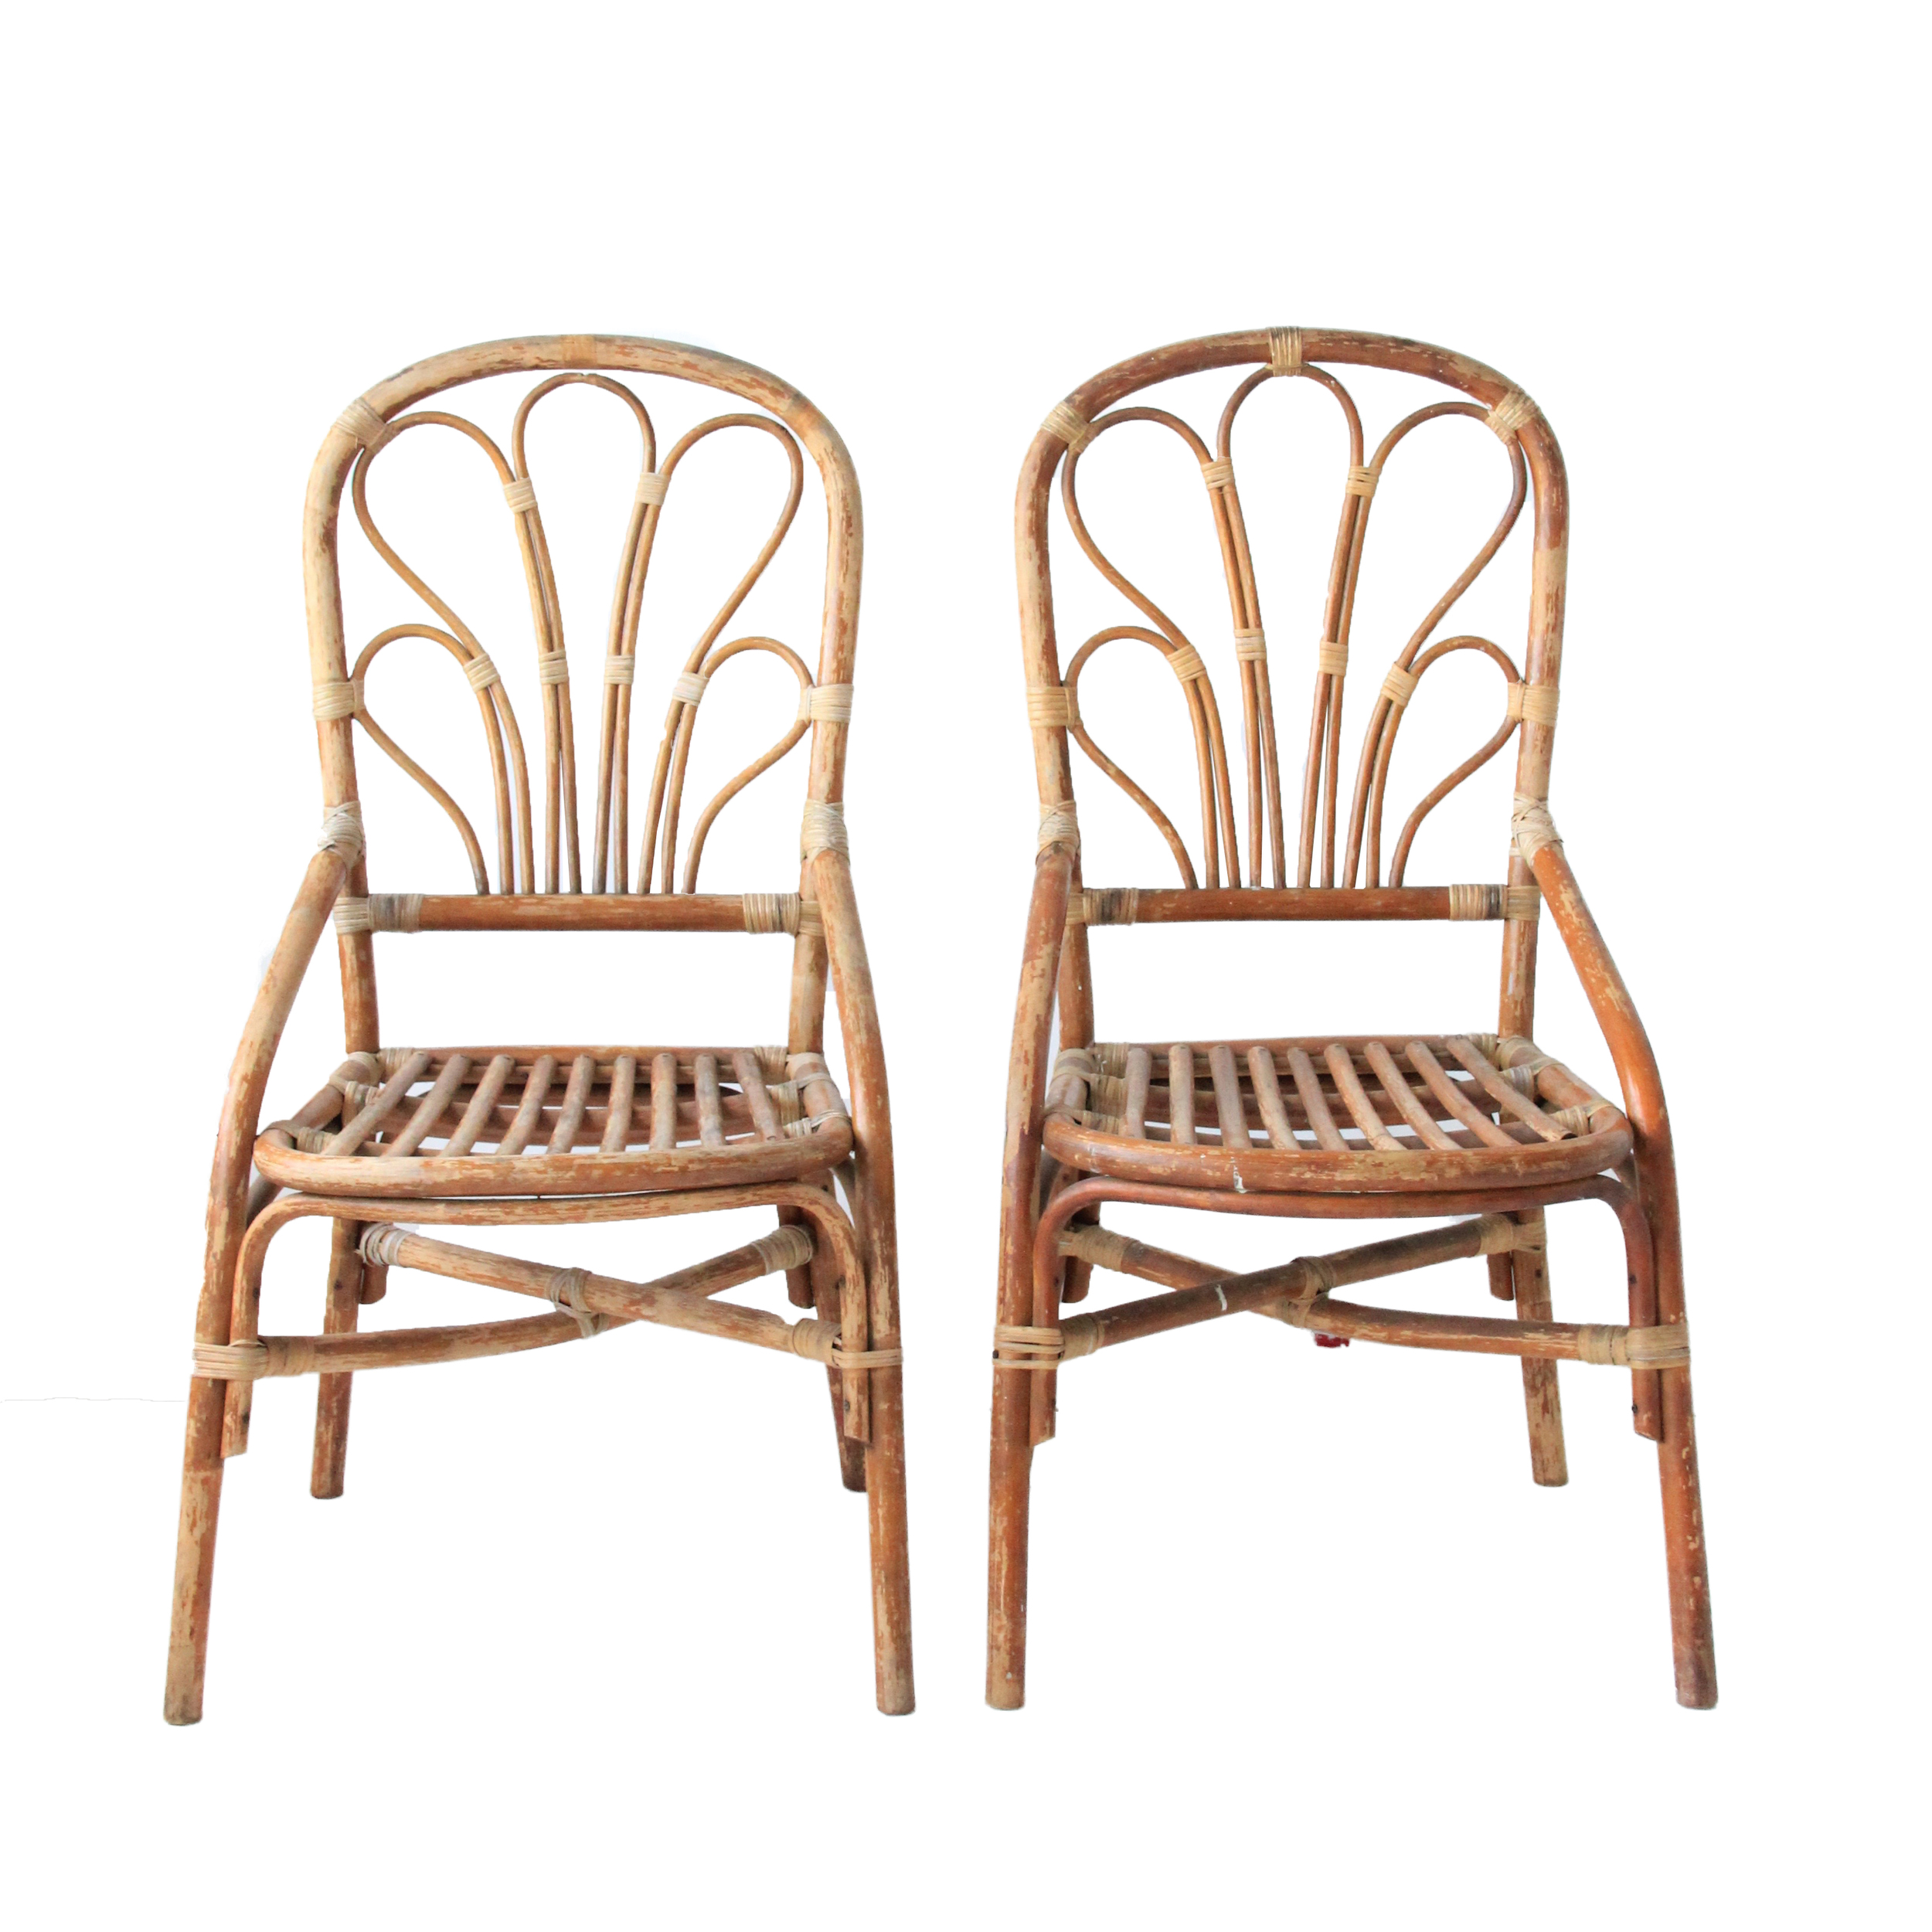 Vintage Bamboo and Rattan Bohemian Chairs